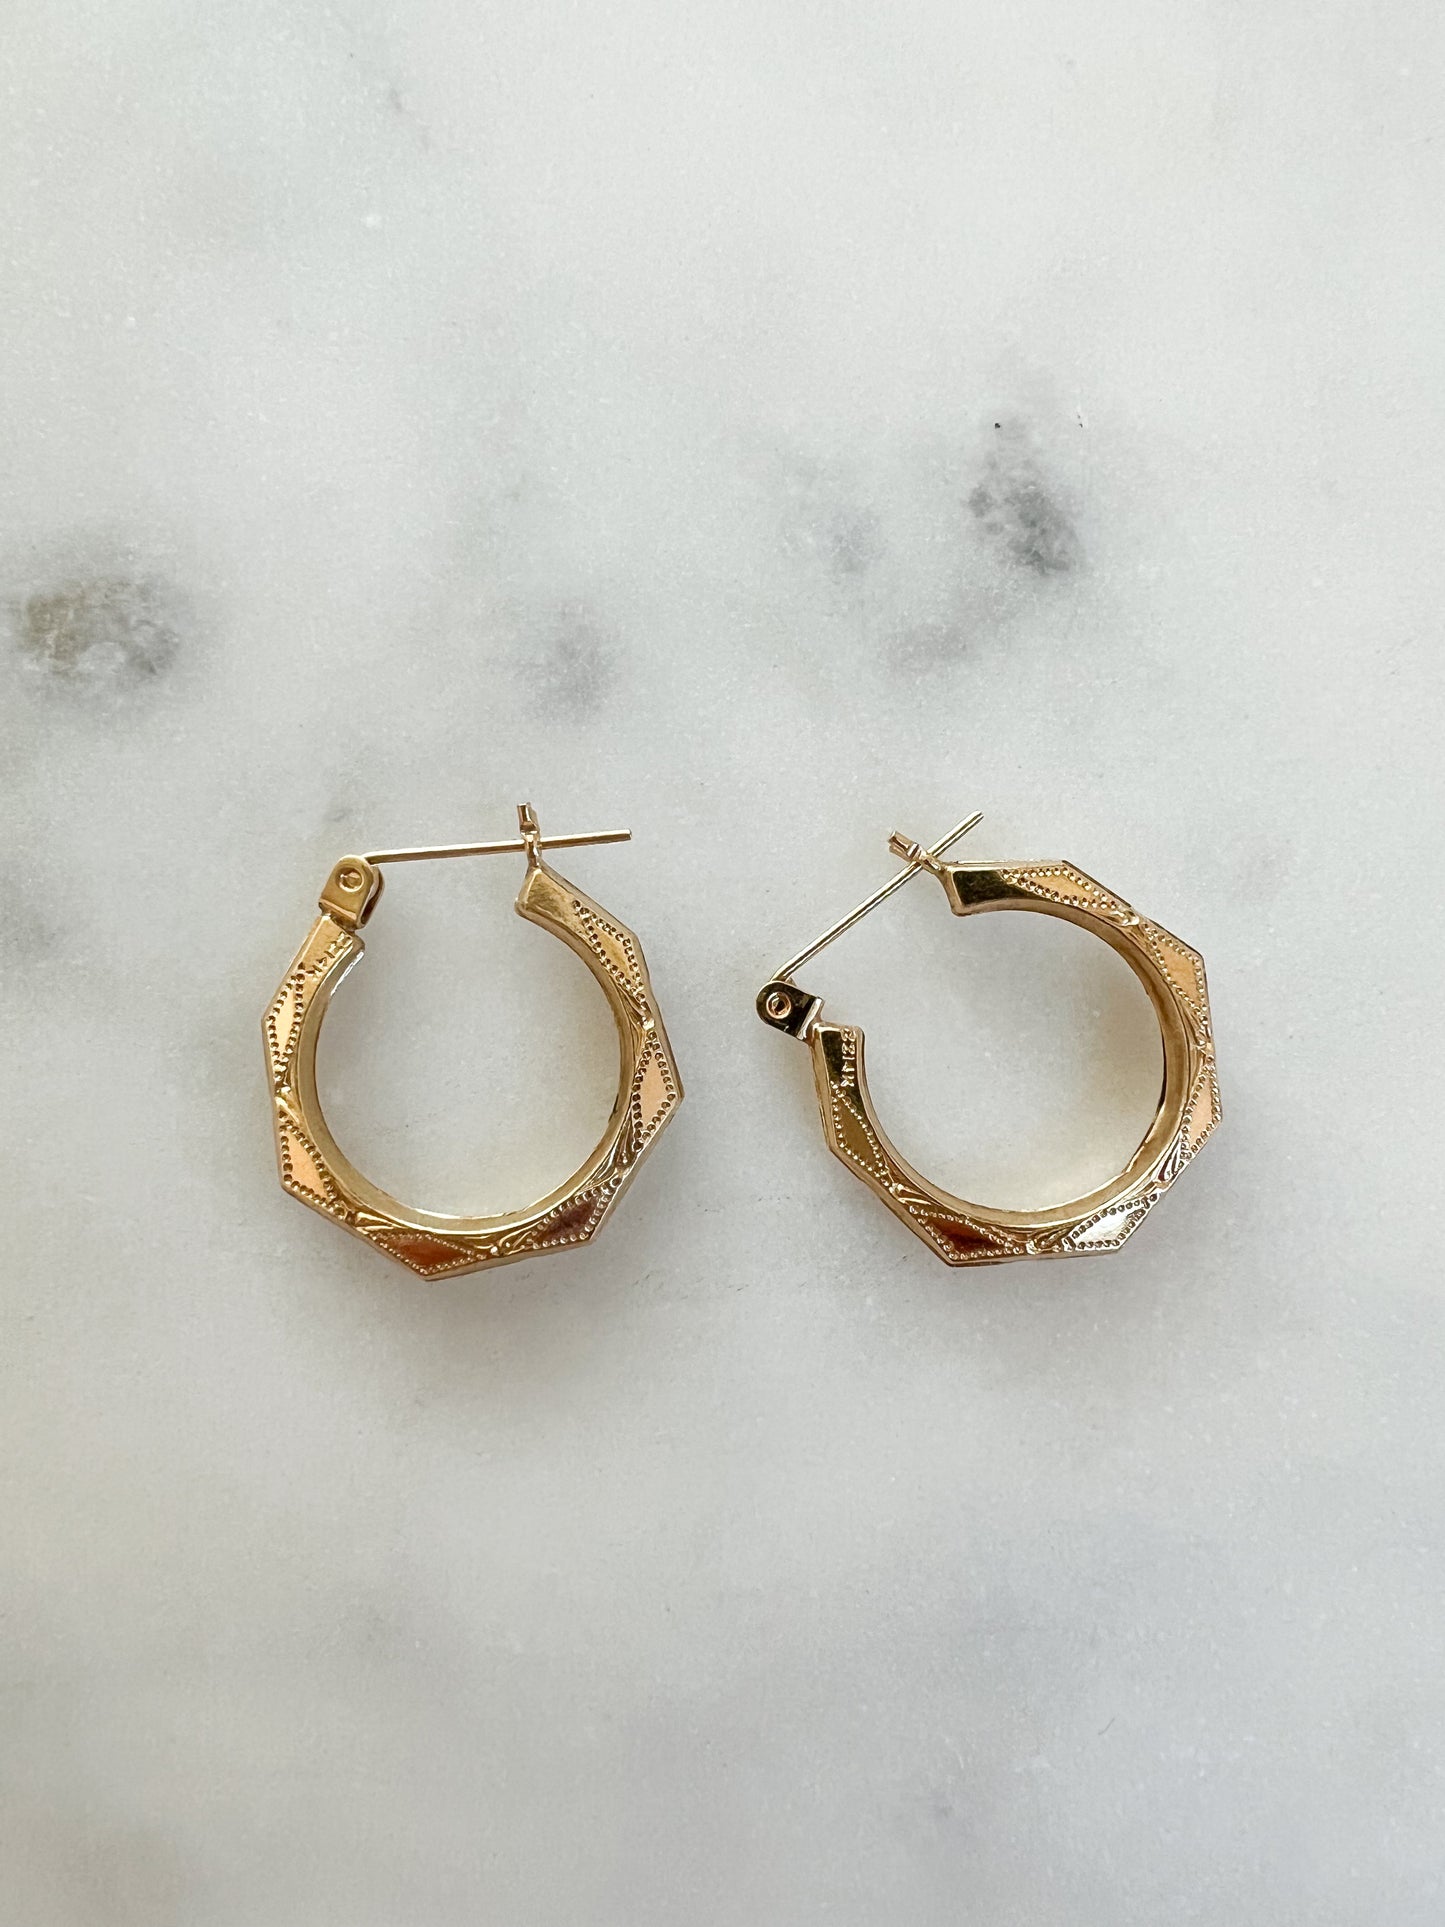 14K Patterned Yellow Gold Hoops